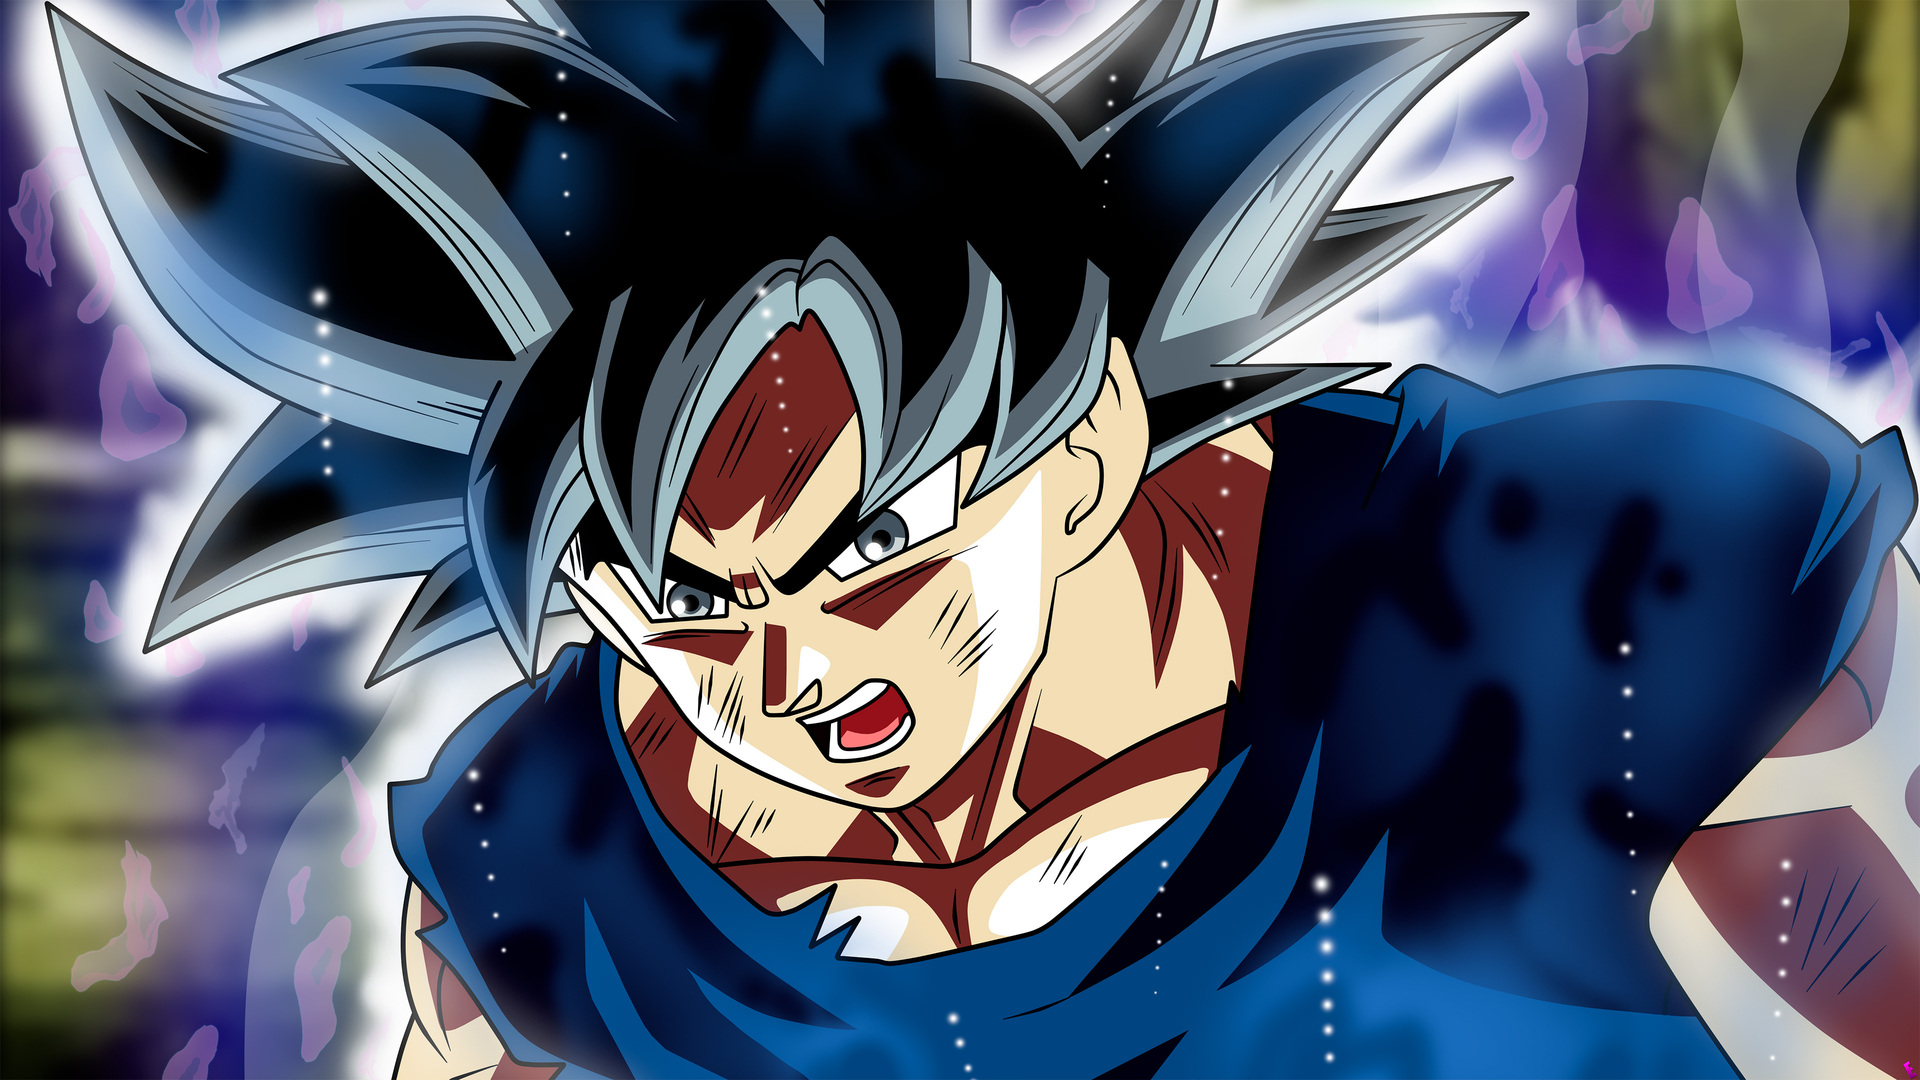 Goku Hd Wallpaper 4k For Android | Best Funny Images